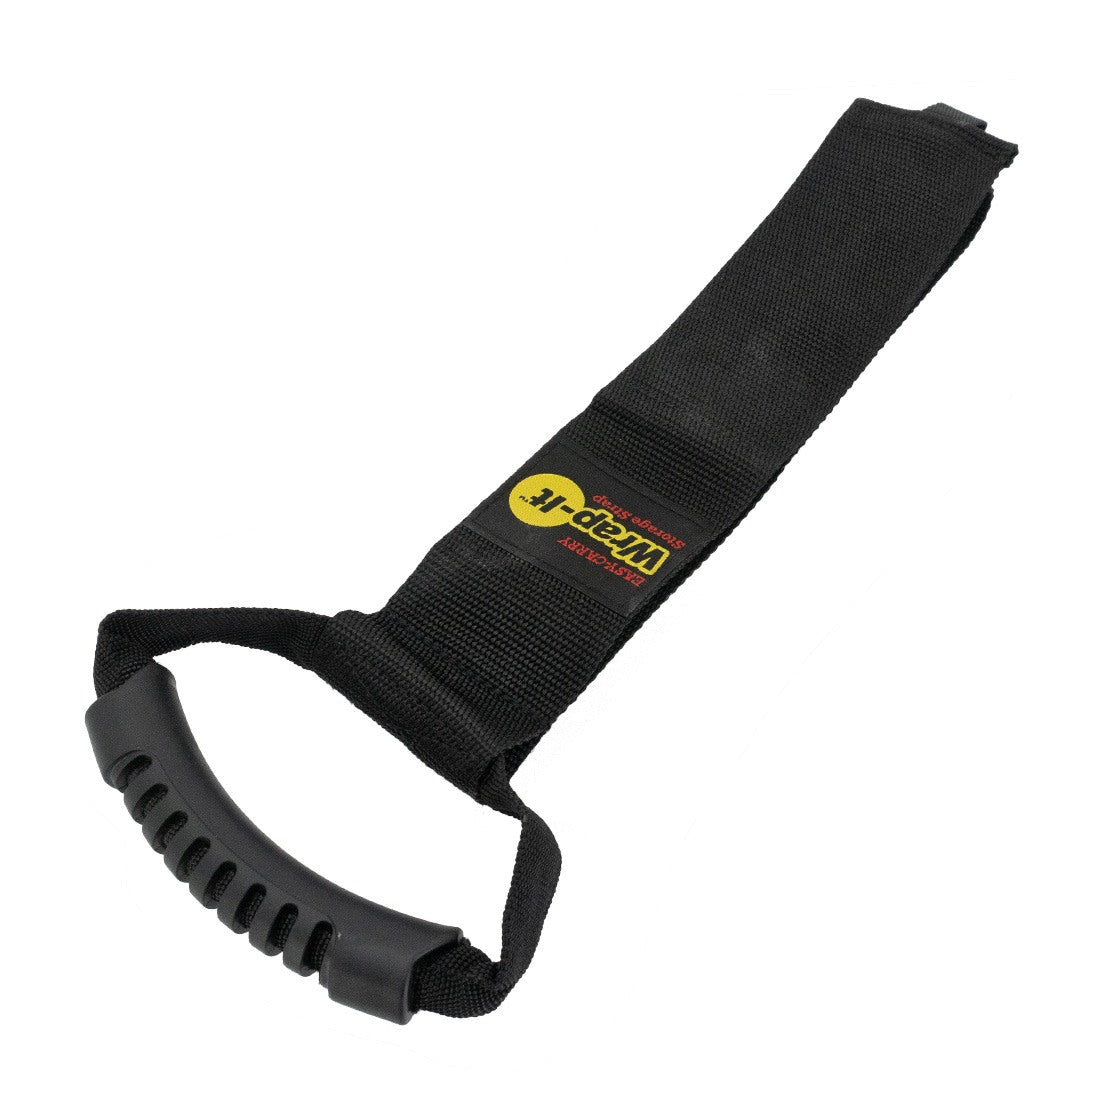 Wrap-It Easy-Carry Storage Strap - 28 Inch Upside Down Oblique Right View